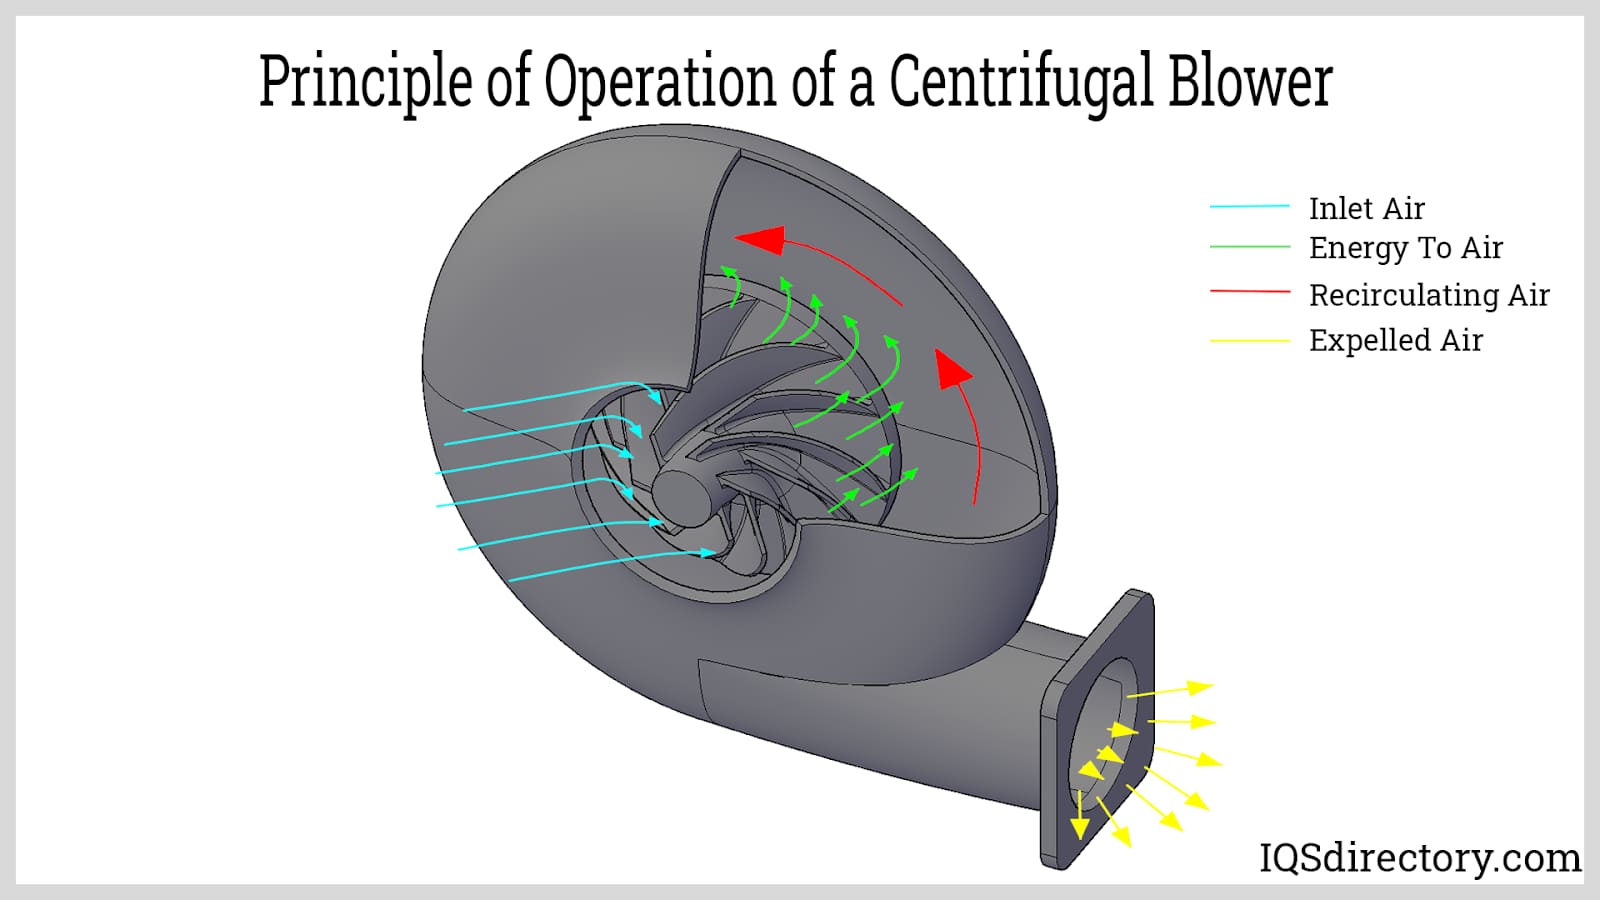 Principle of operation of a centrifugal blower